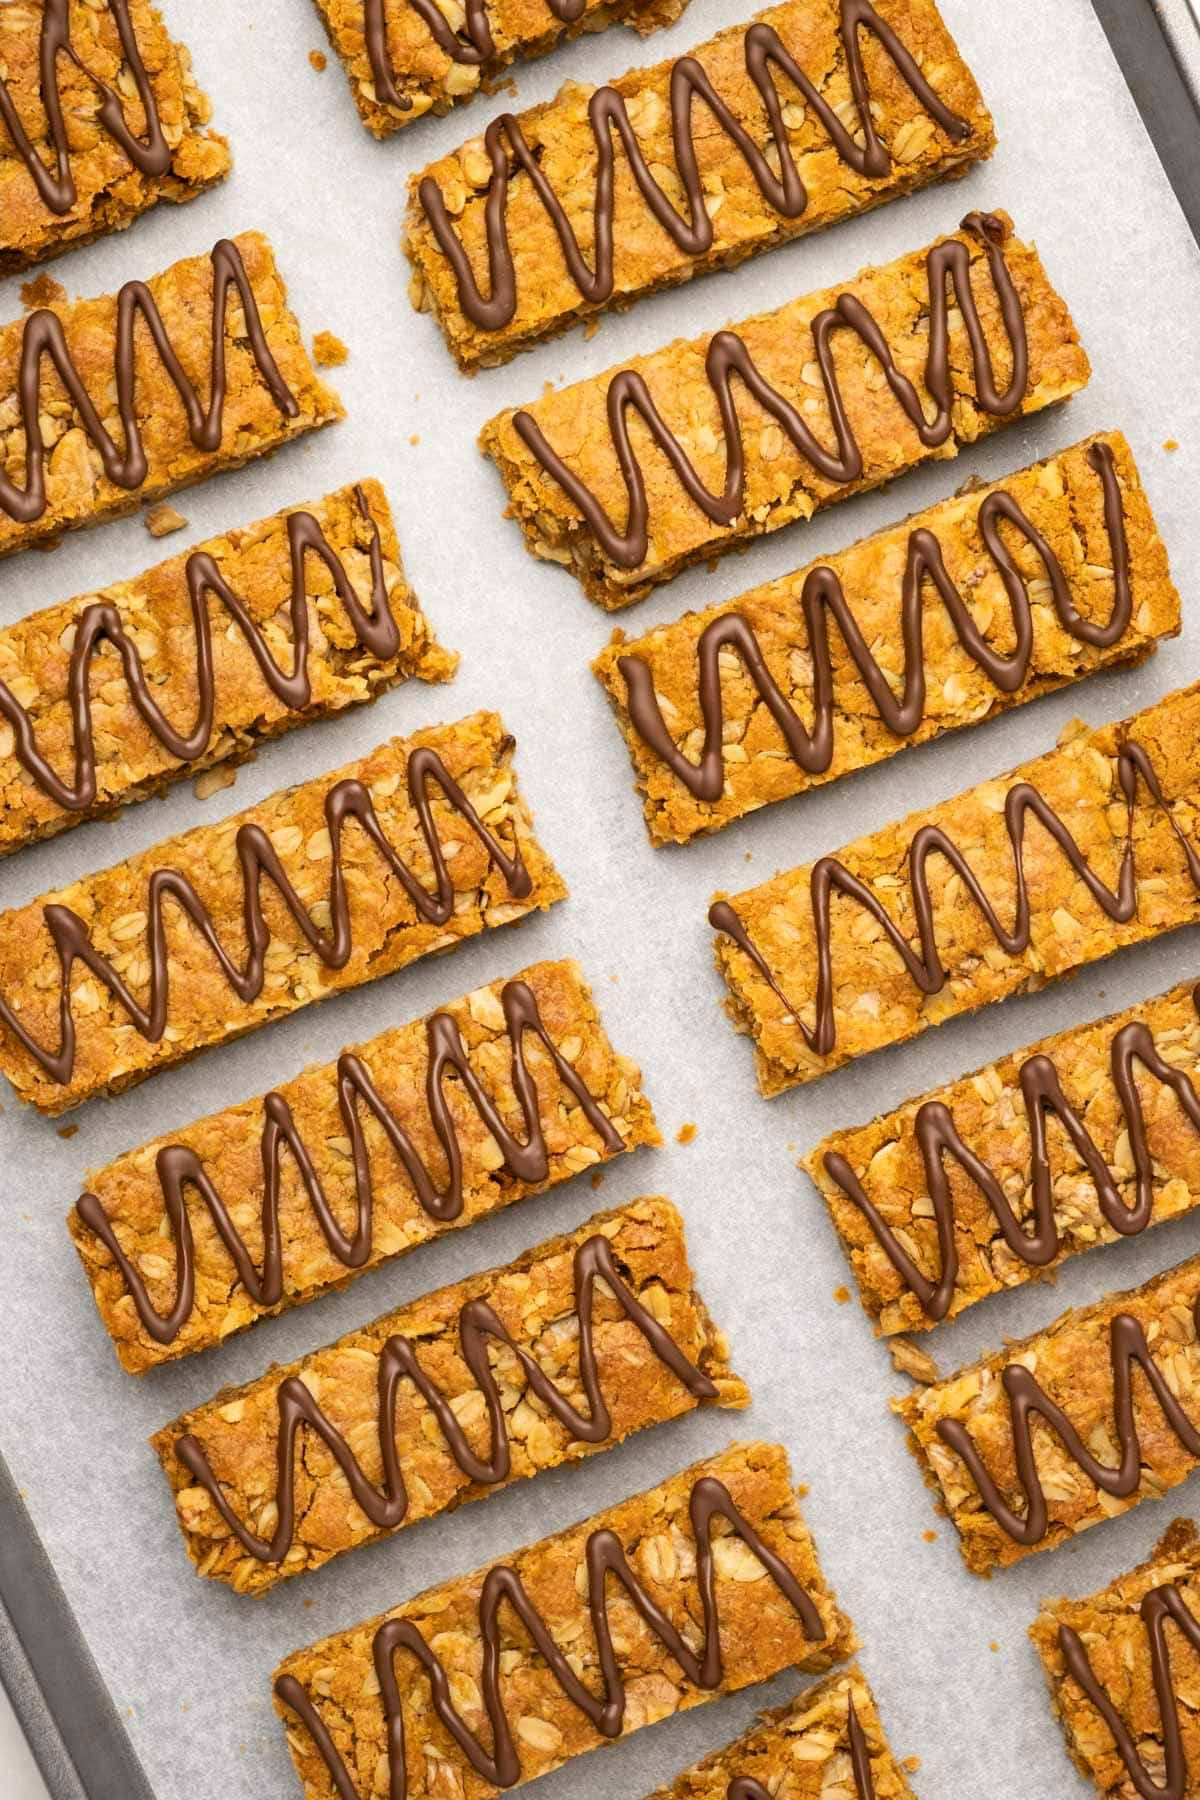 Vegan oatmeal bars drizzled with chocolate on a parchment lined baking sheet.